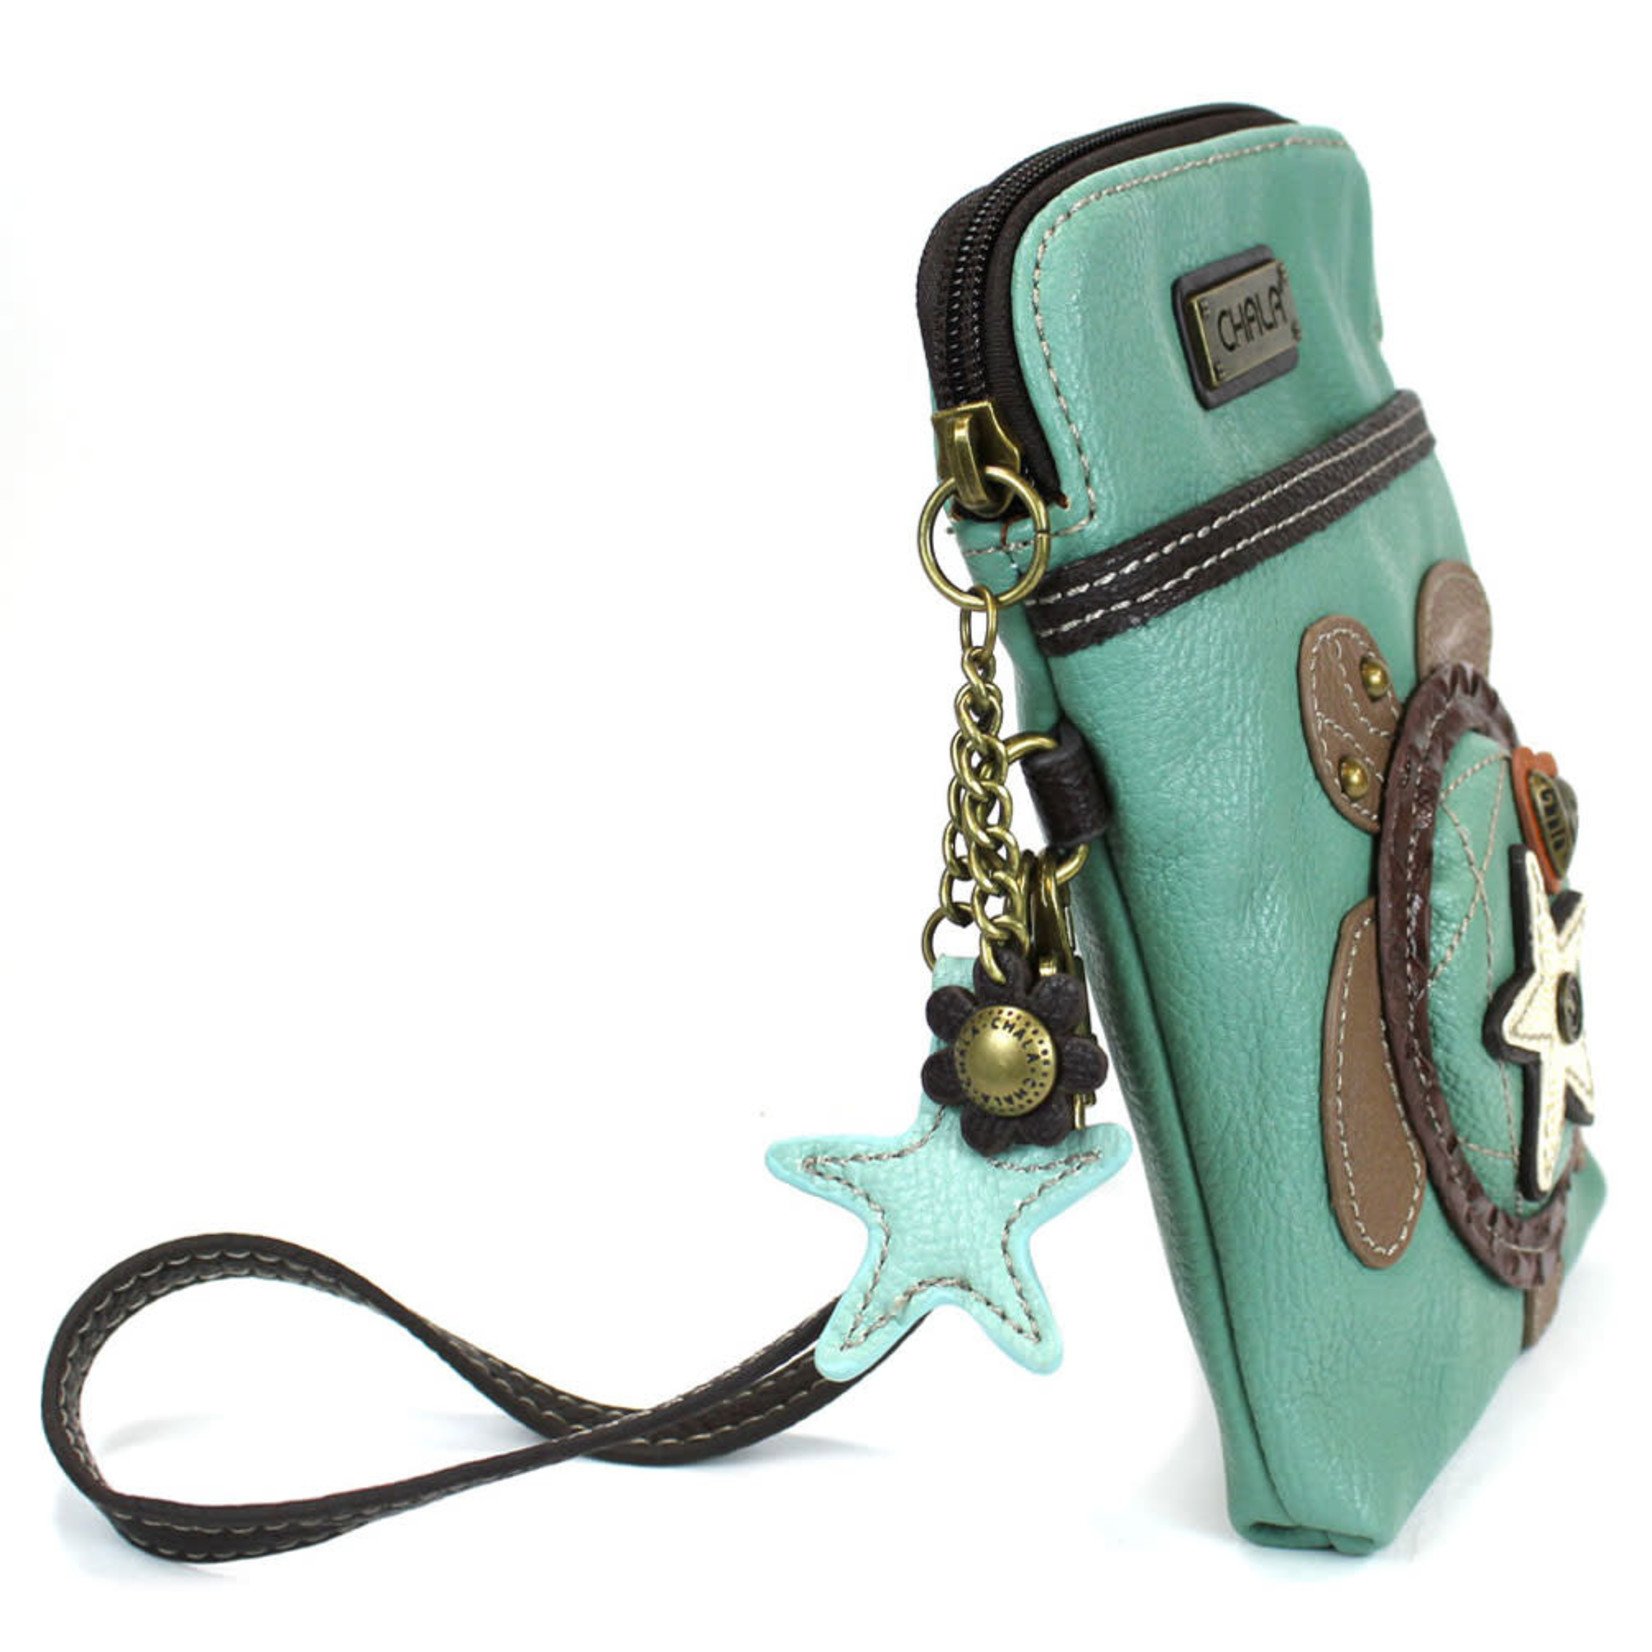 Chala Cell Phone Crossbody Turtle Teal